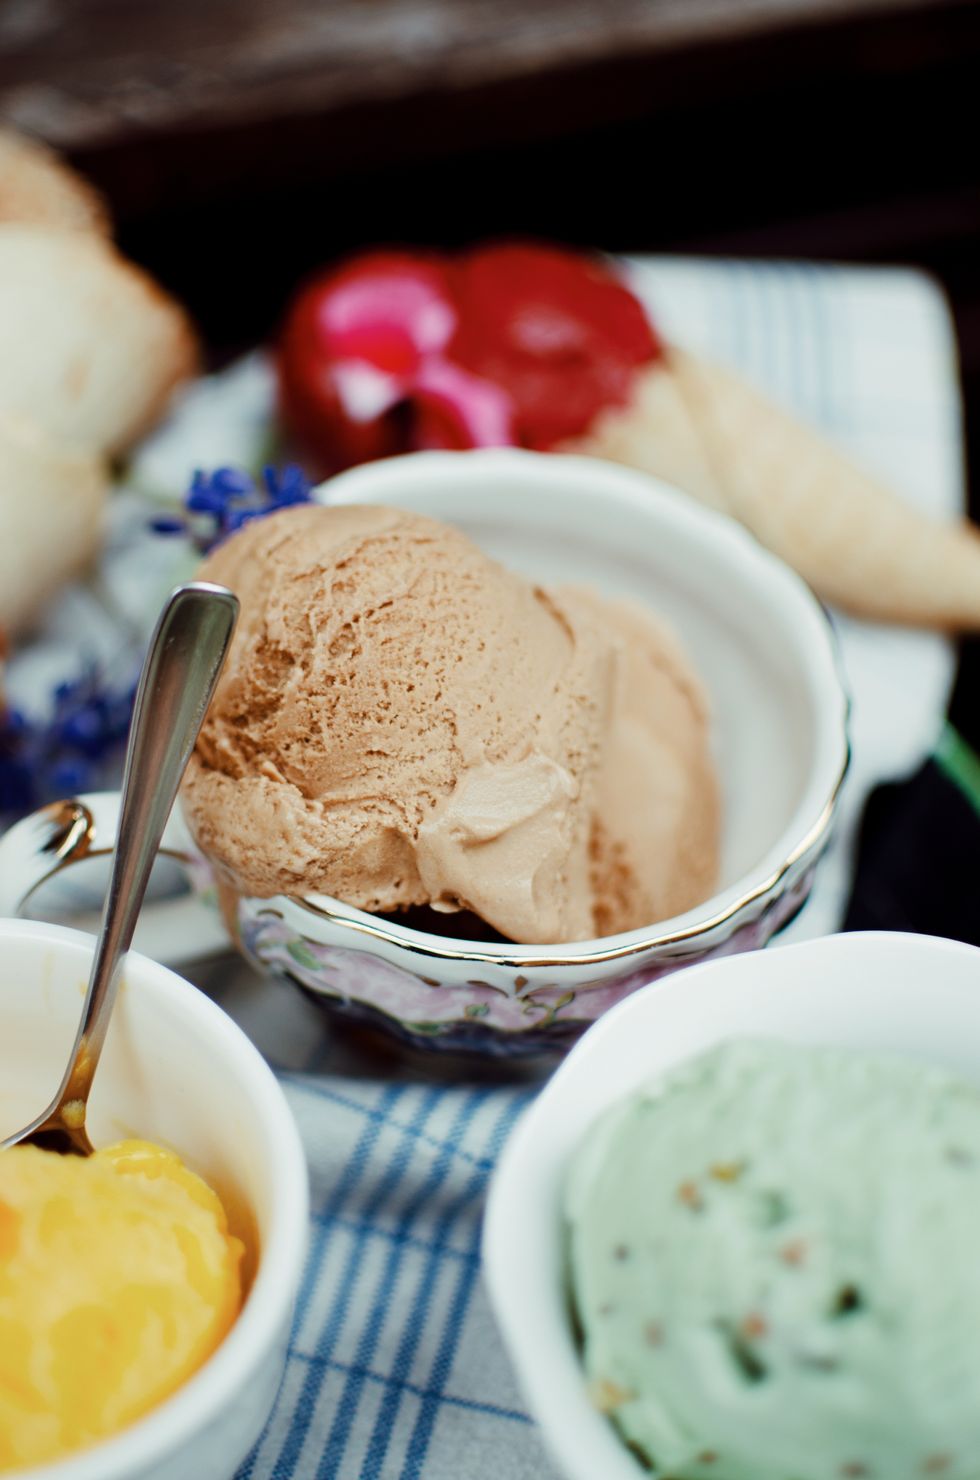 A Perfect Alternative For Your Ice Cream Craving